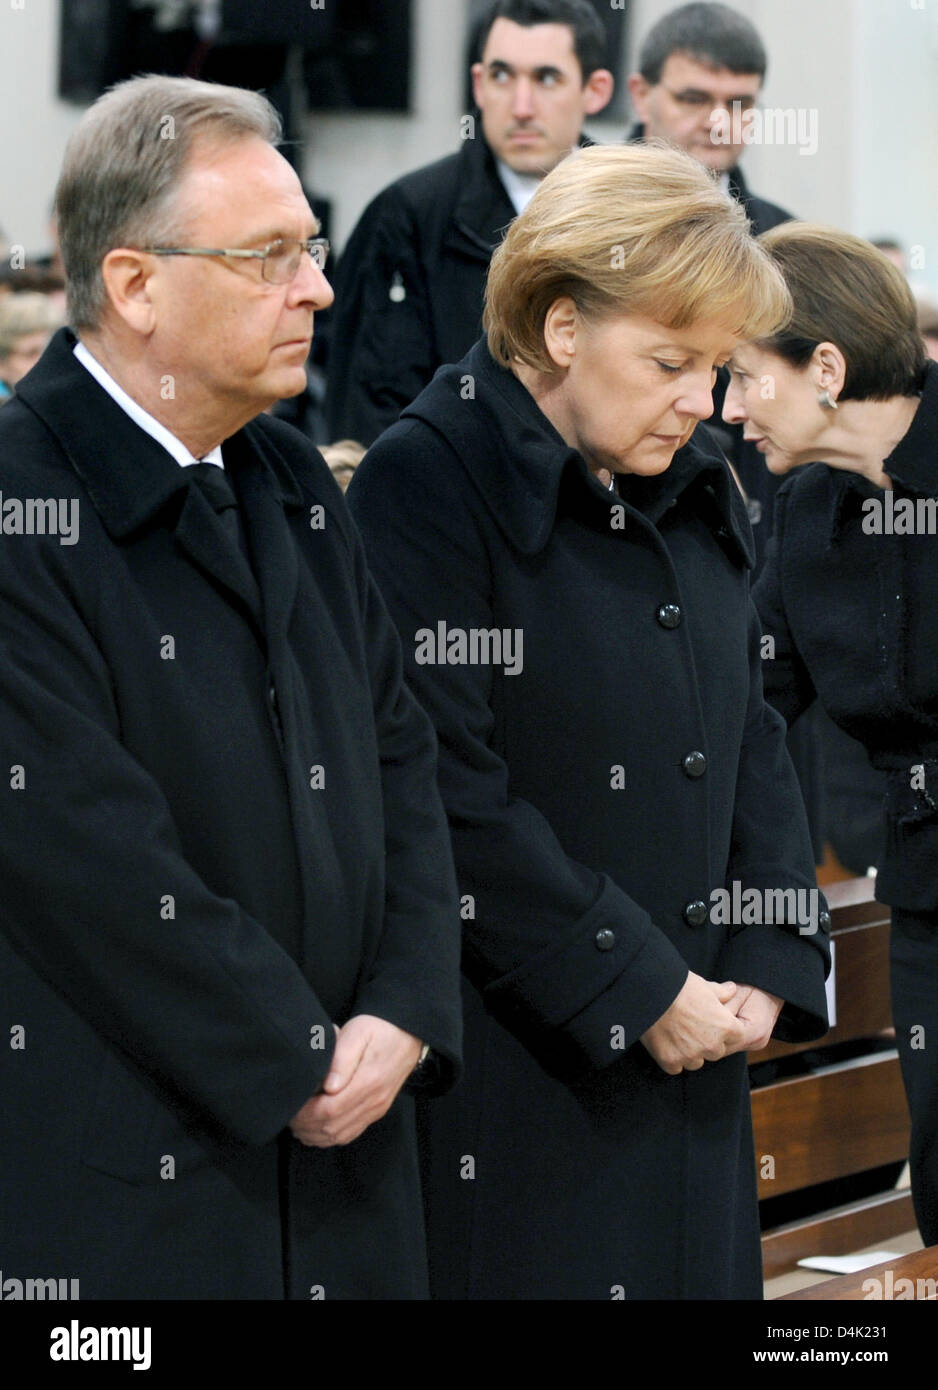 German Chancellor Angela Merkel (R) and the President of the Federal Constitutional Court, Hans-Juergen Papier (L) attend the official memorial service at St. Karl Borromaeus Church in Winnenden, Germany, 21 March 2009. Mourners commemorated the 15 vicitims killed during the rampage shooting at secondary school ?Albertville? in Winnenden and Wendlingen on 11 March 2009, when 17-yea Stock Photo